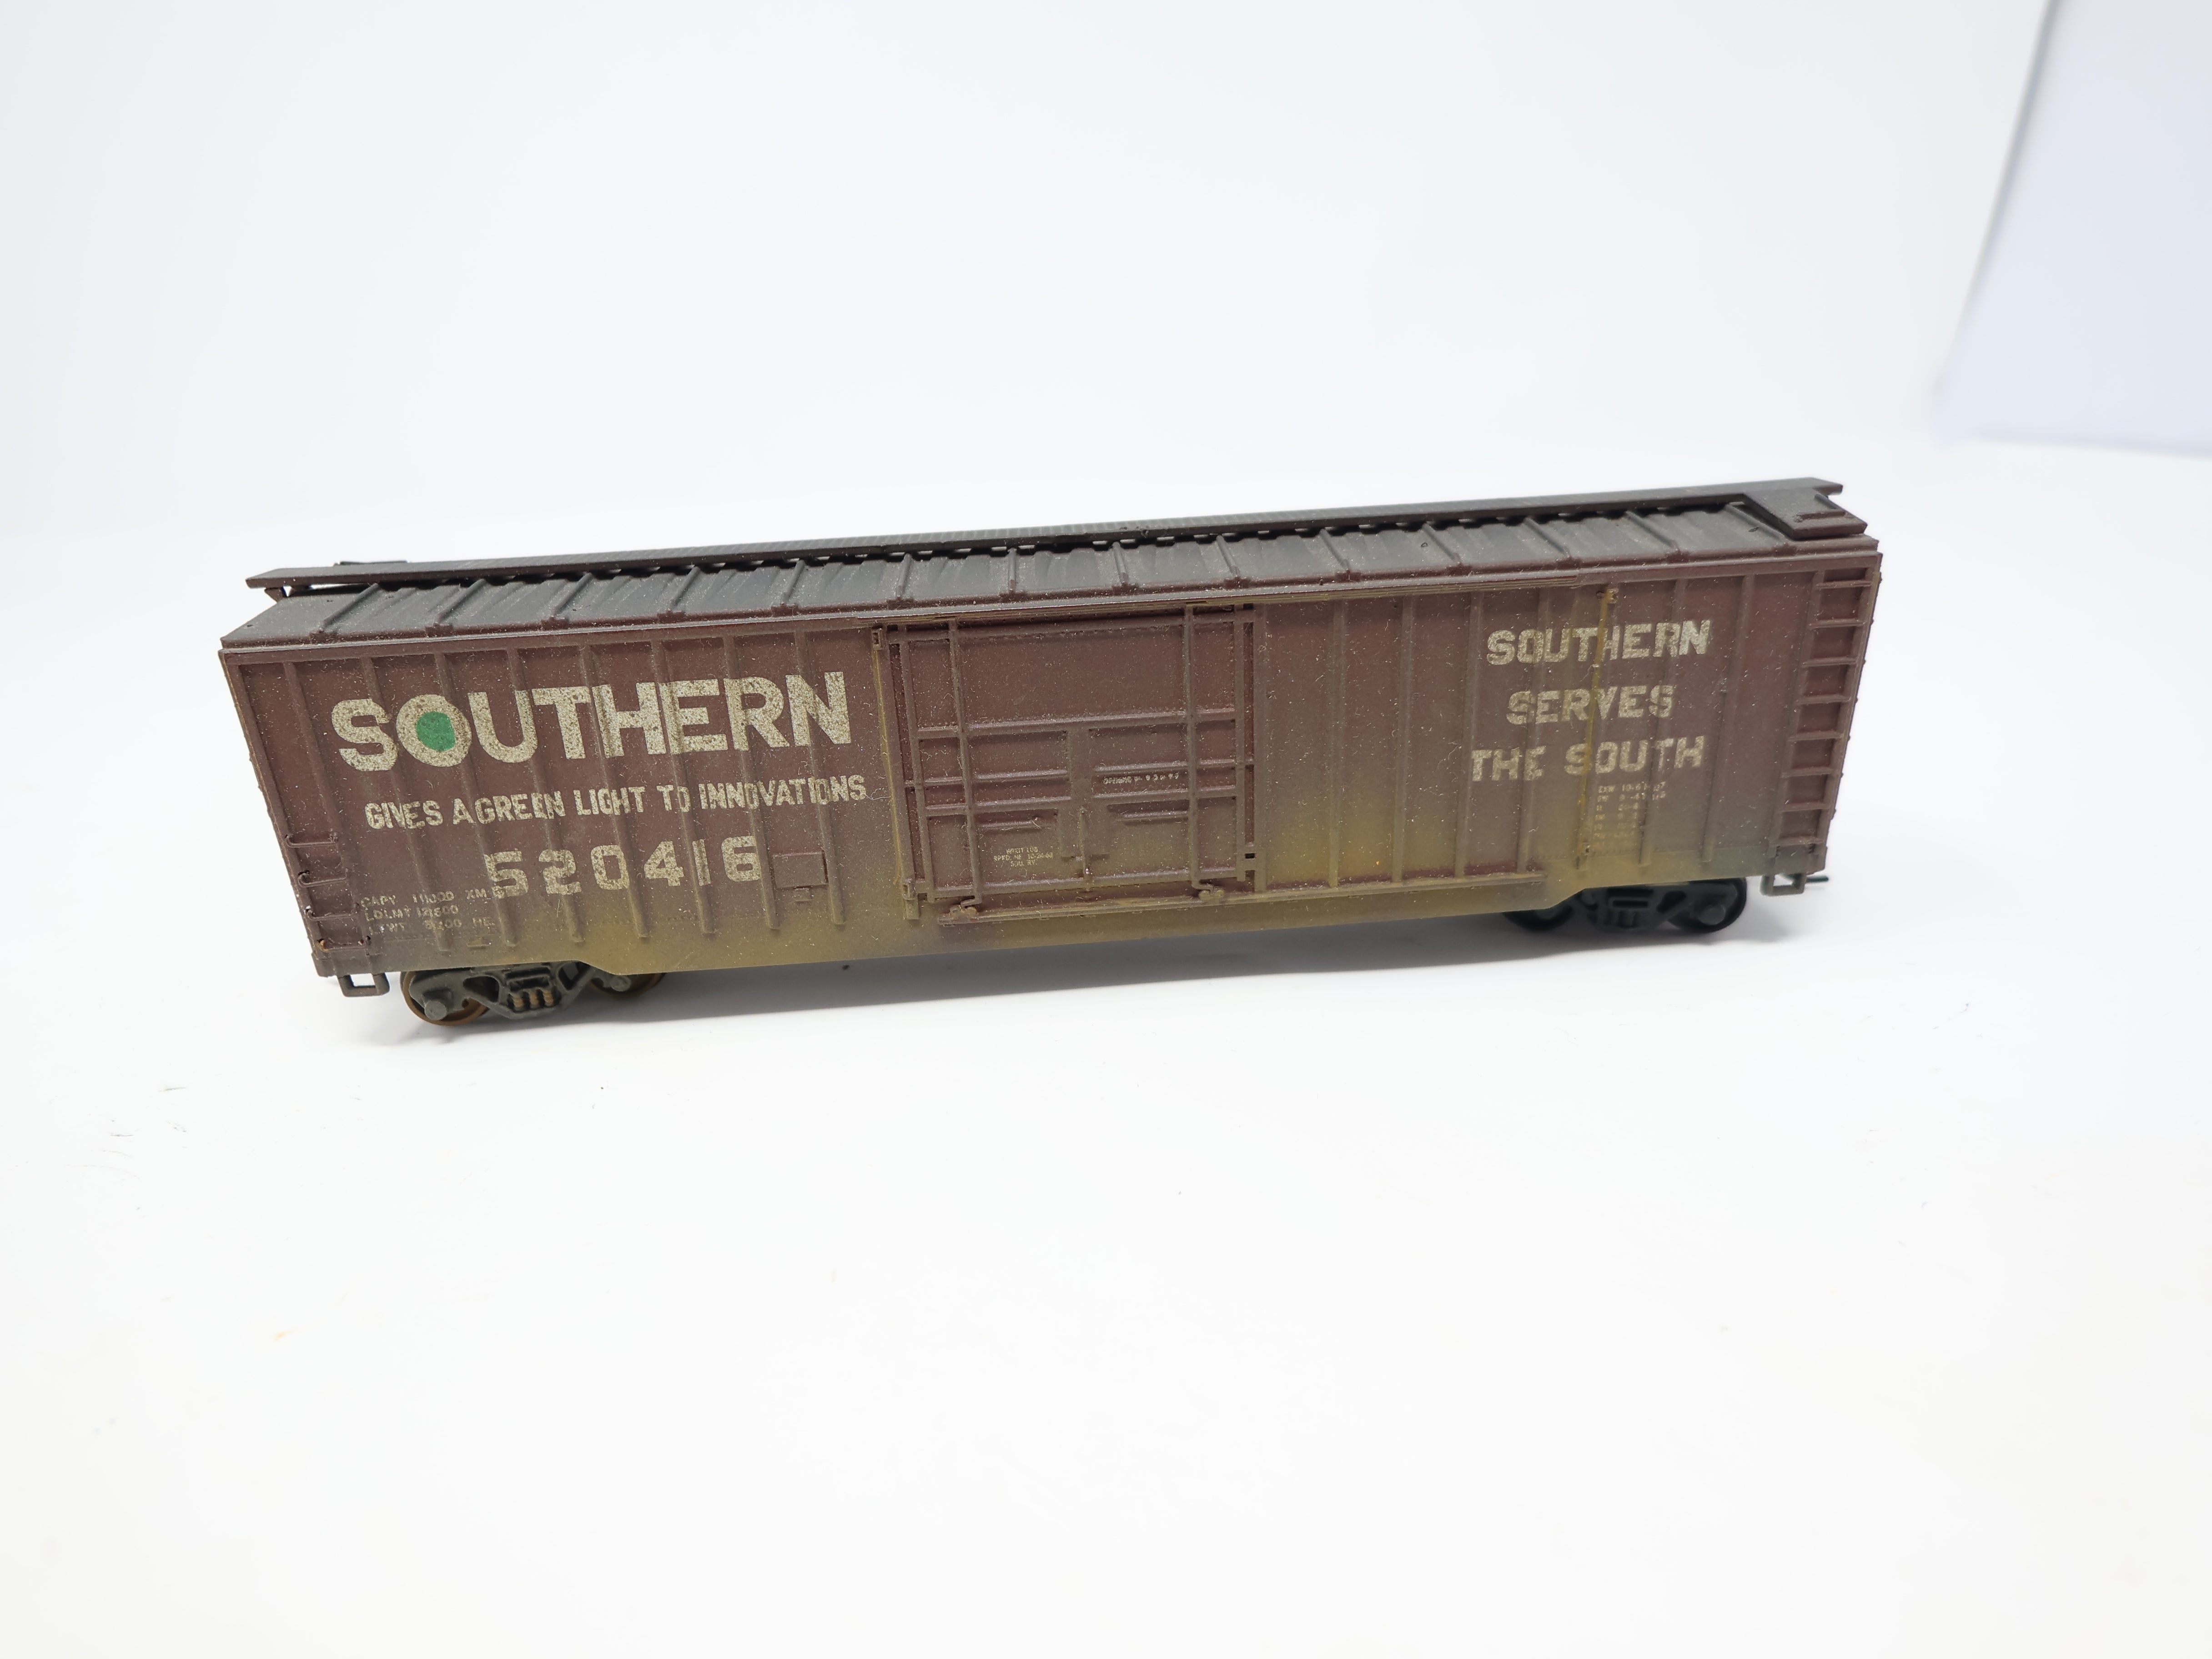 USED Athearn HO Scale, Weathered 50' Box Car, Southern #520416